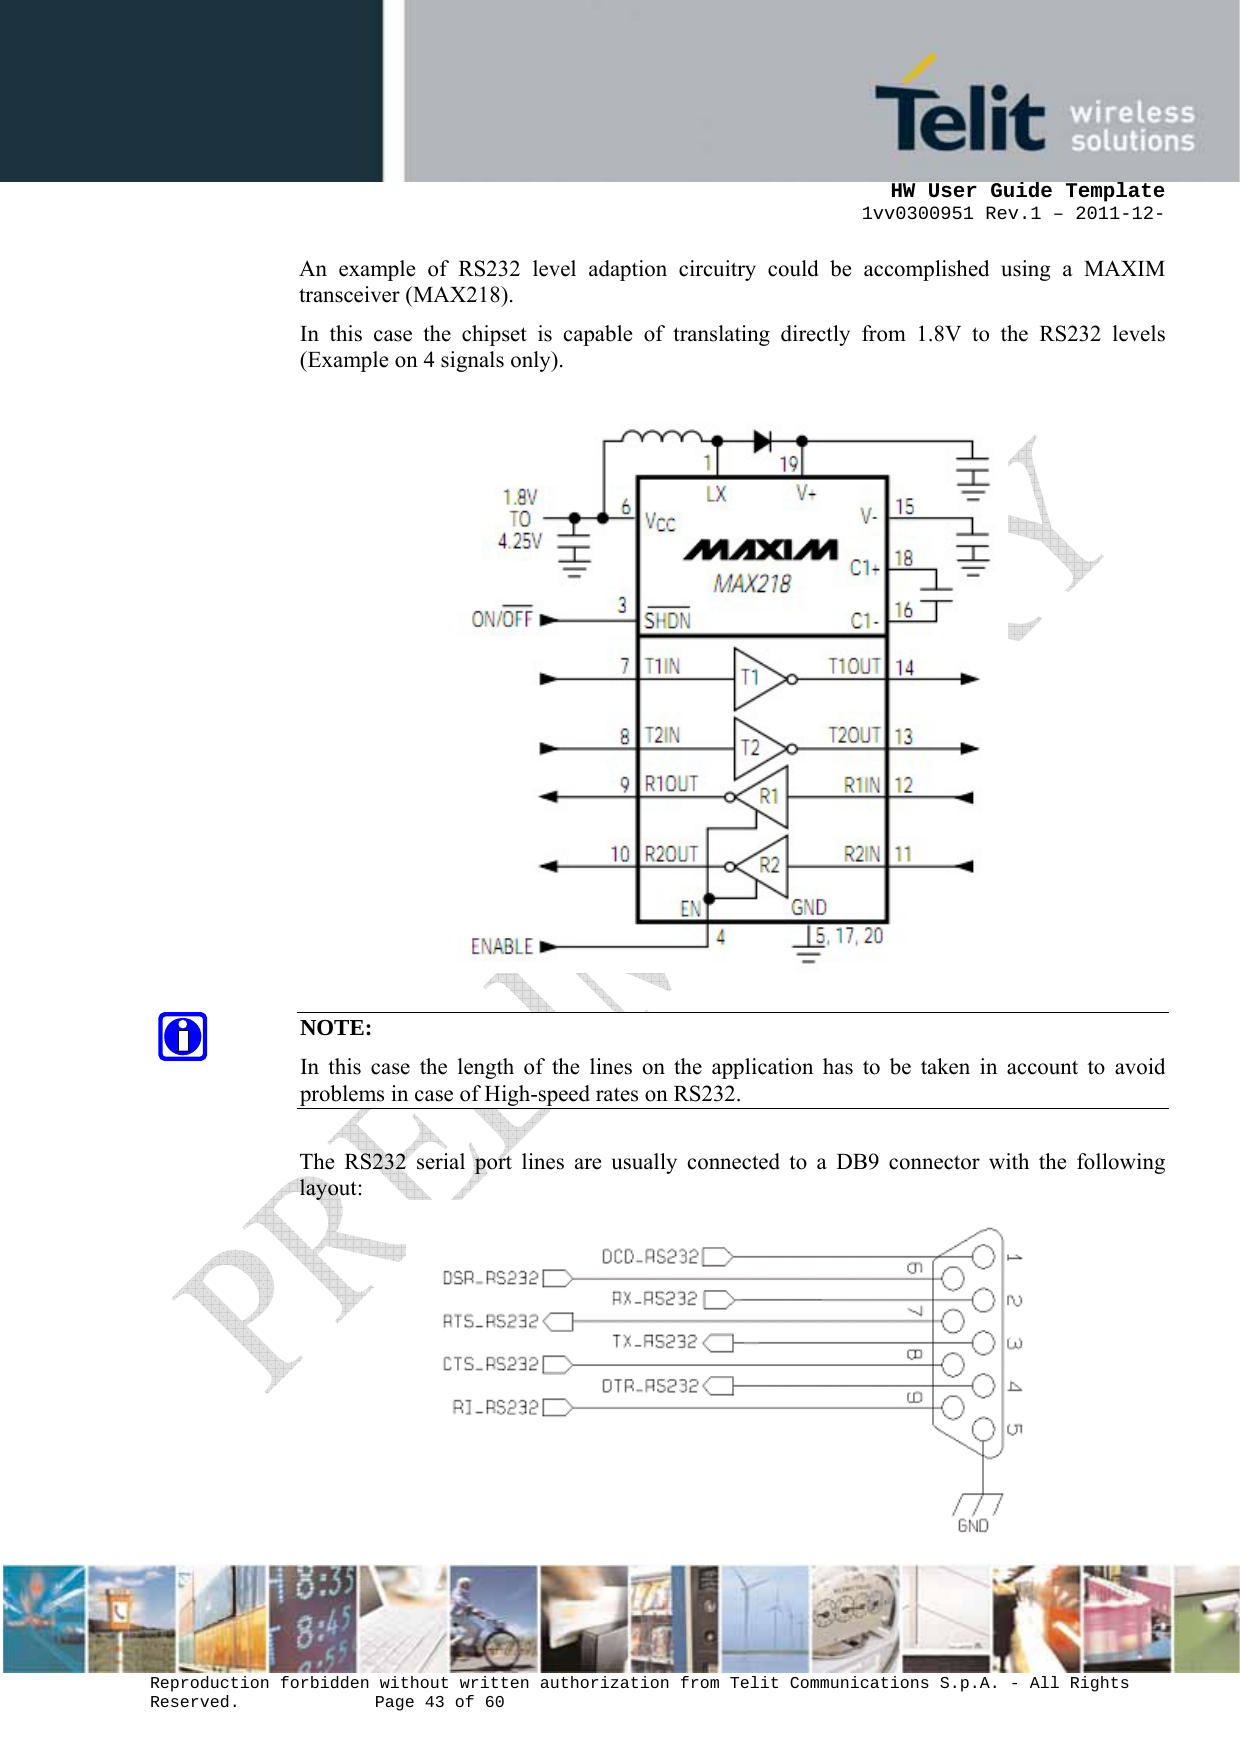      HW User Guide Template 1vv0300951 Rev.1 – 2011-12-  Reproduction forbidden without written authorization from Telit Communications S.p.A. - All Rights Reserved.    Page 43 of 60                                                     An example of RS232 level adaption circuitry could be accomplished using a MAXIM transceiver (MAX218).  In this case the chipset is capable of translating directly from 1.8V to the RS232 levels (Example on 4 signals only).    NOTE: In this case the length of the lines on the application has to be taken in account to avoid problems in case of High-speed rates on RS232.  The RS232 serial port lines are usually connected to a DB9 connector with the following layout:    